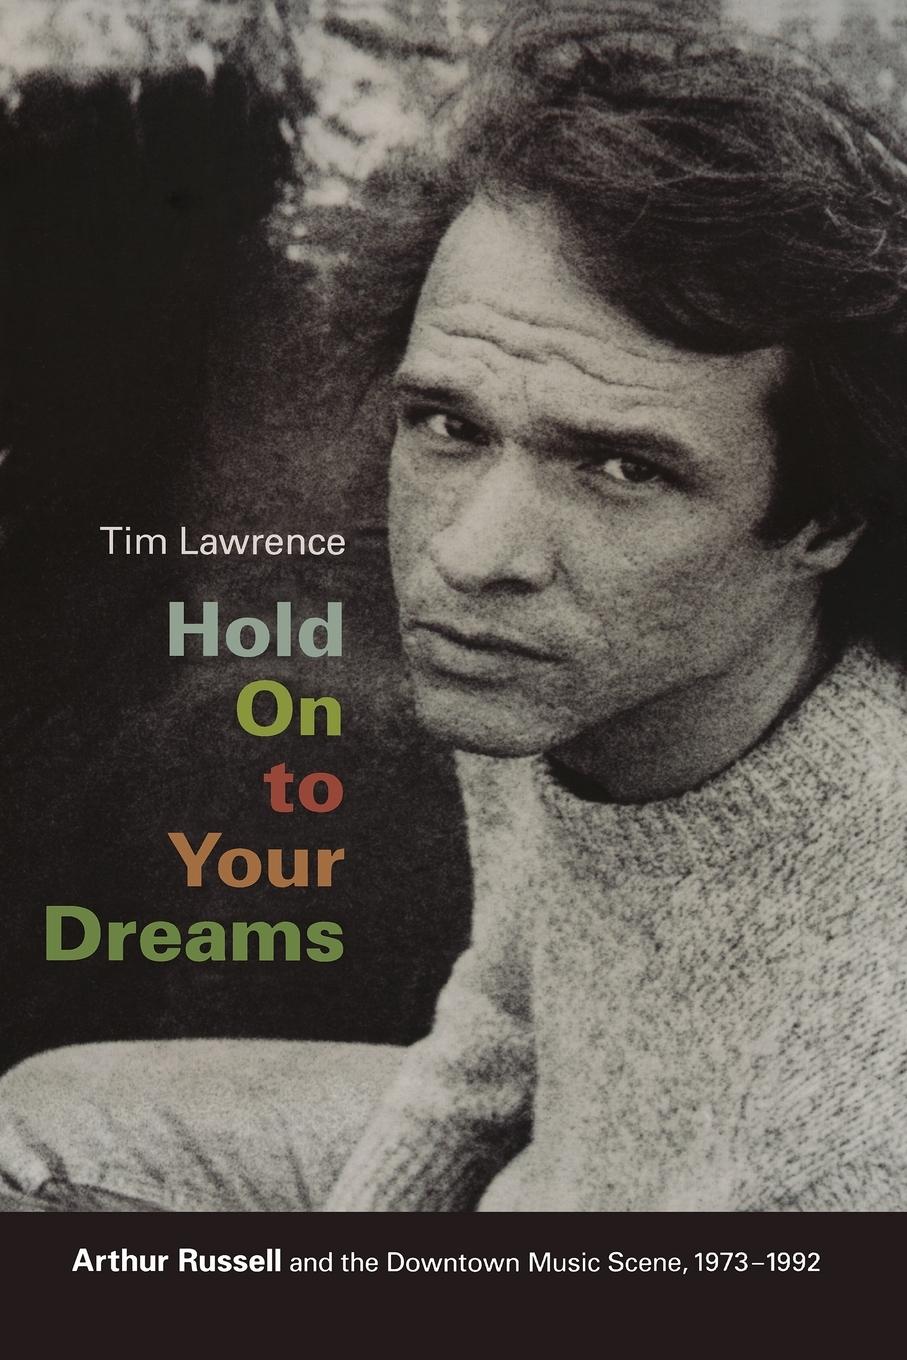 Hold On to Your Dreams / Arthur Russell and the Downtown Music Scene, 1973-1992 / Tim Lawrence / Taschenbuch / Paperback / Kartoniert / Broschiert / Englisch / 2009 / Duke University Press - Lawrence, Tim